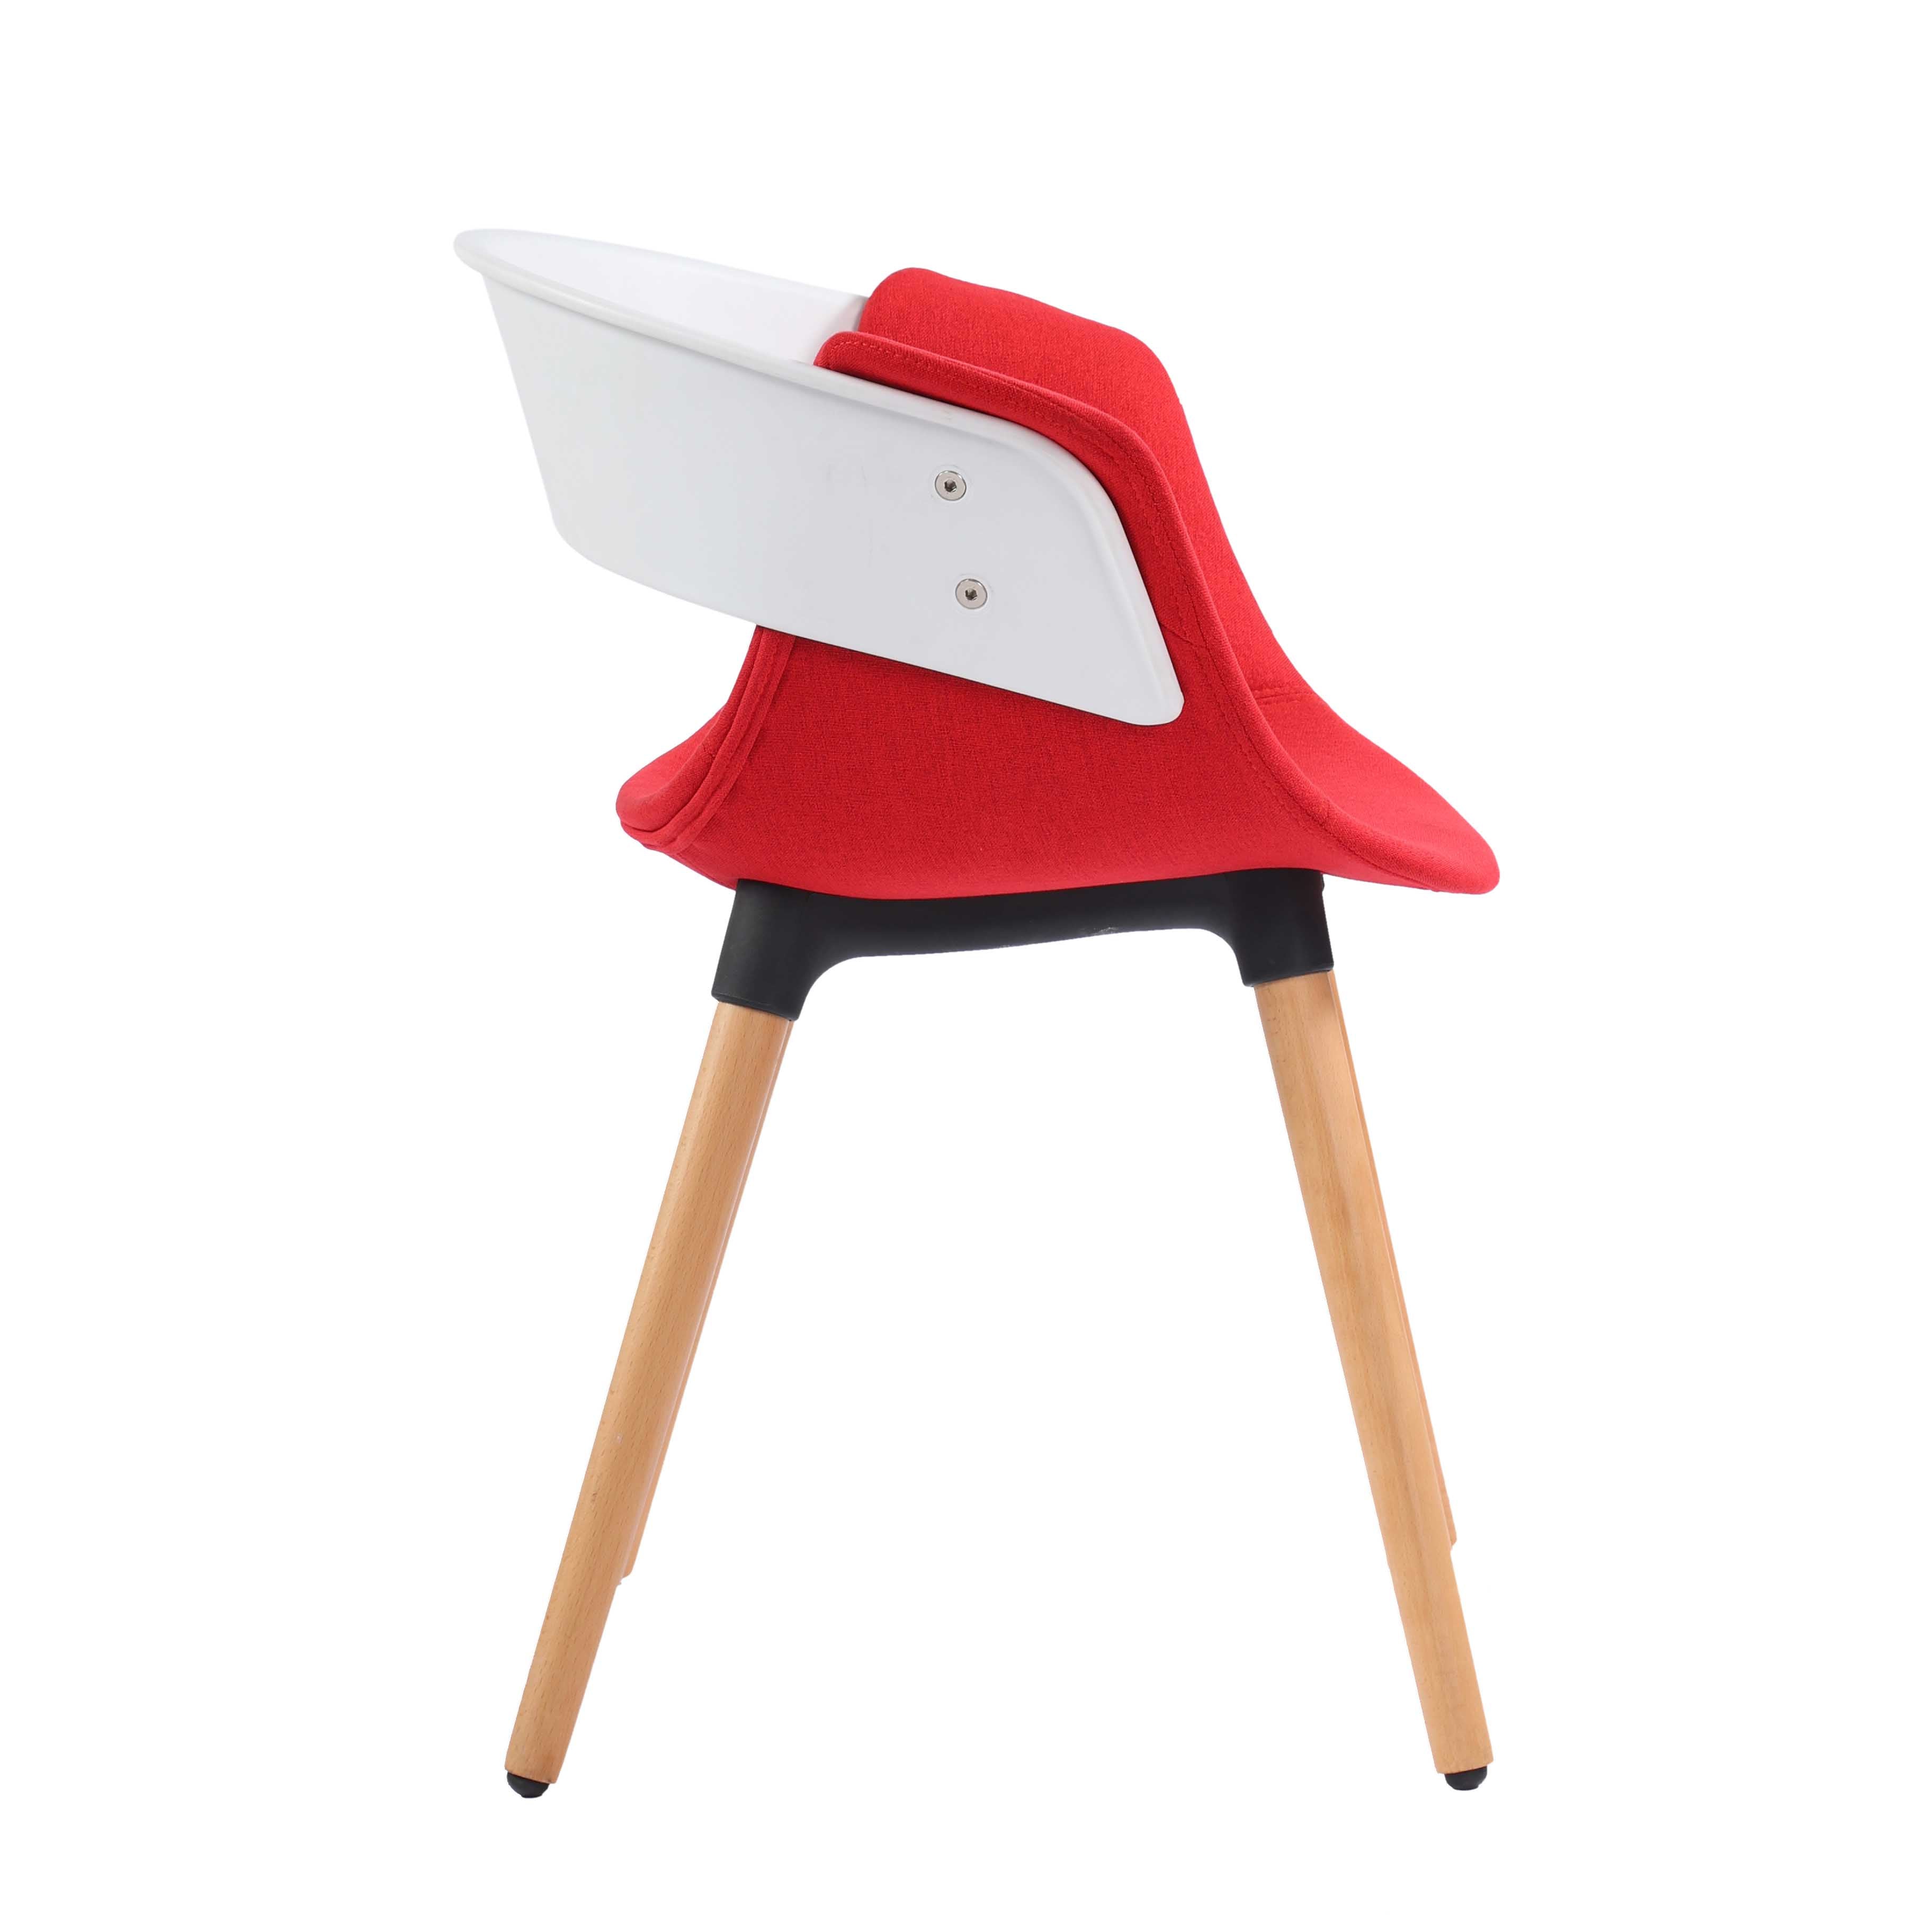 Casper Contemporary Armrest Cafe Chair with Wooden Legs - Red